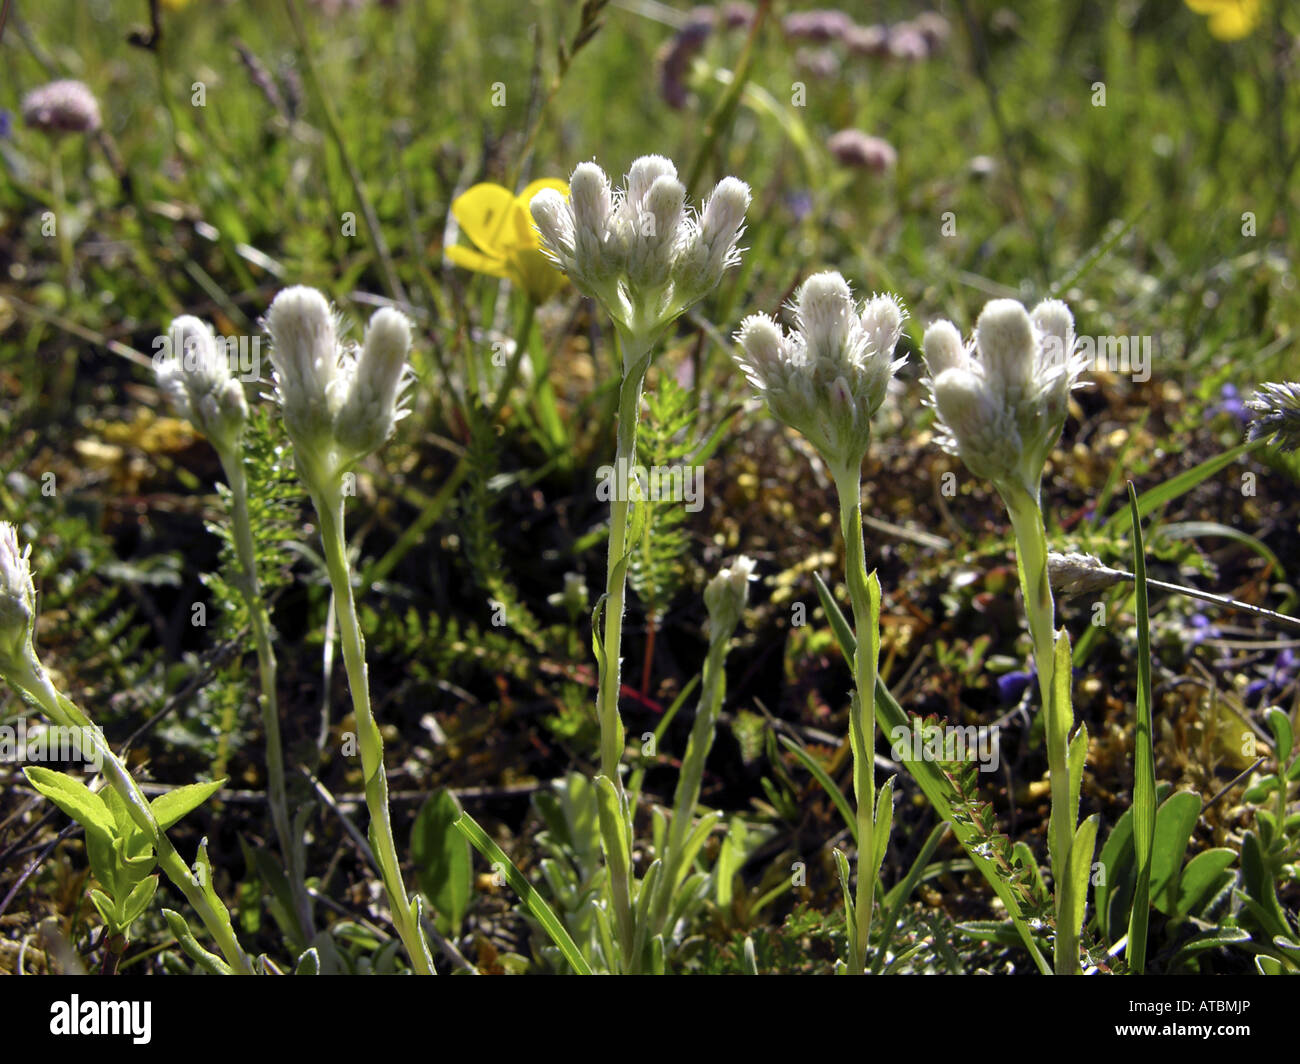 cat's-foot, mountain everlasting (Antennaria dioica), blooming Stock Photo